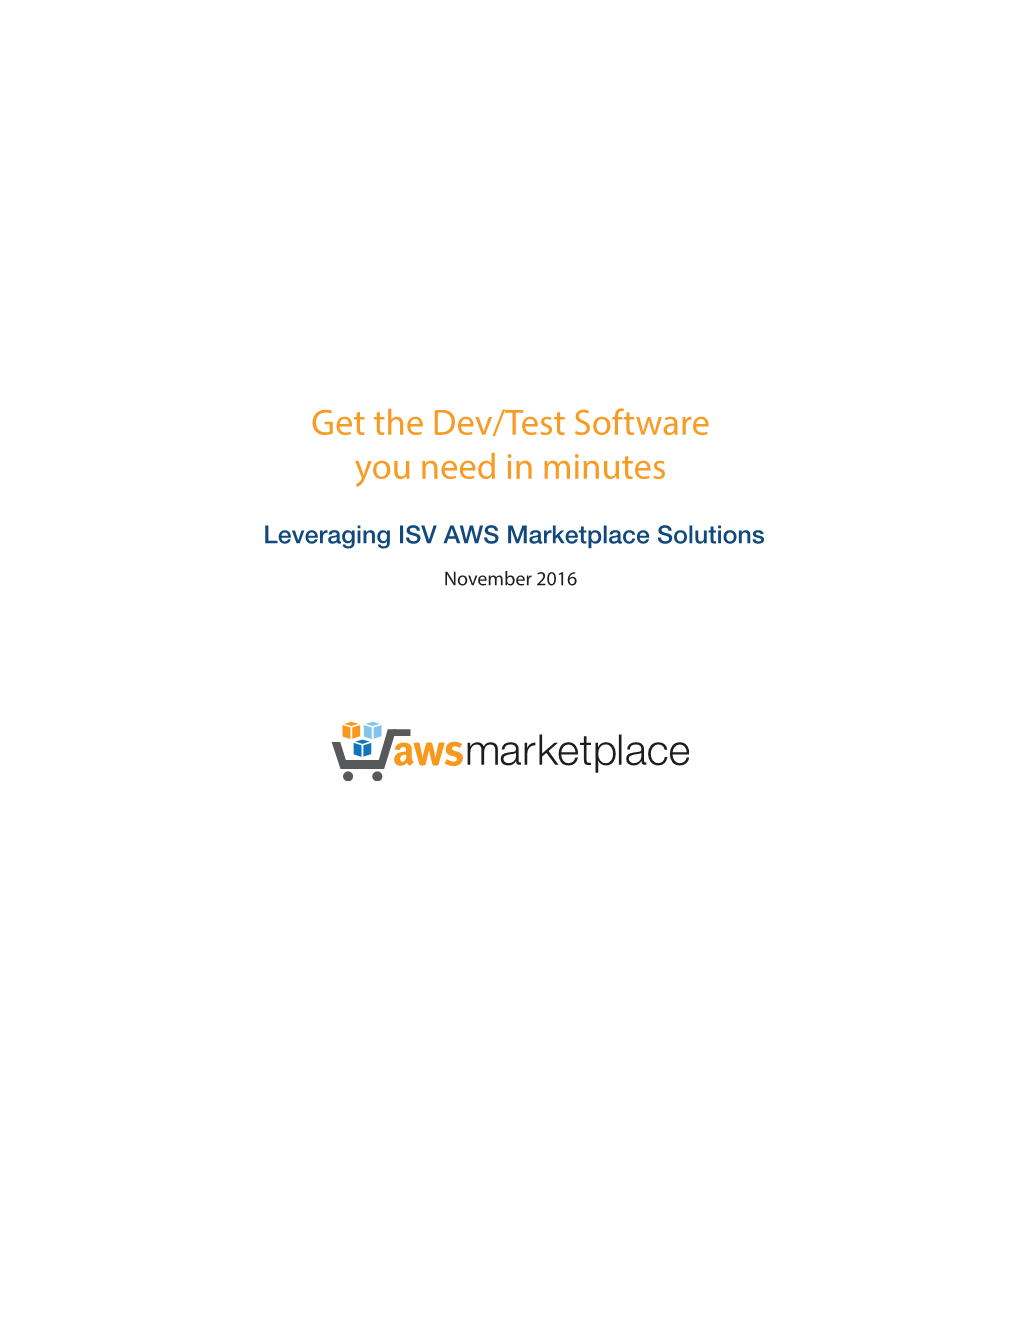 Get the Dev/Test Software You Need in Minutes